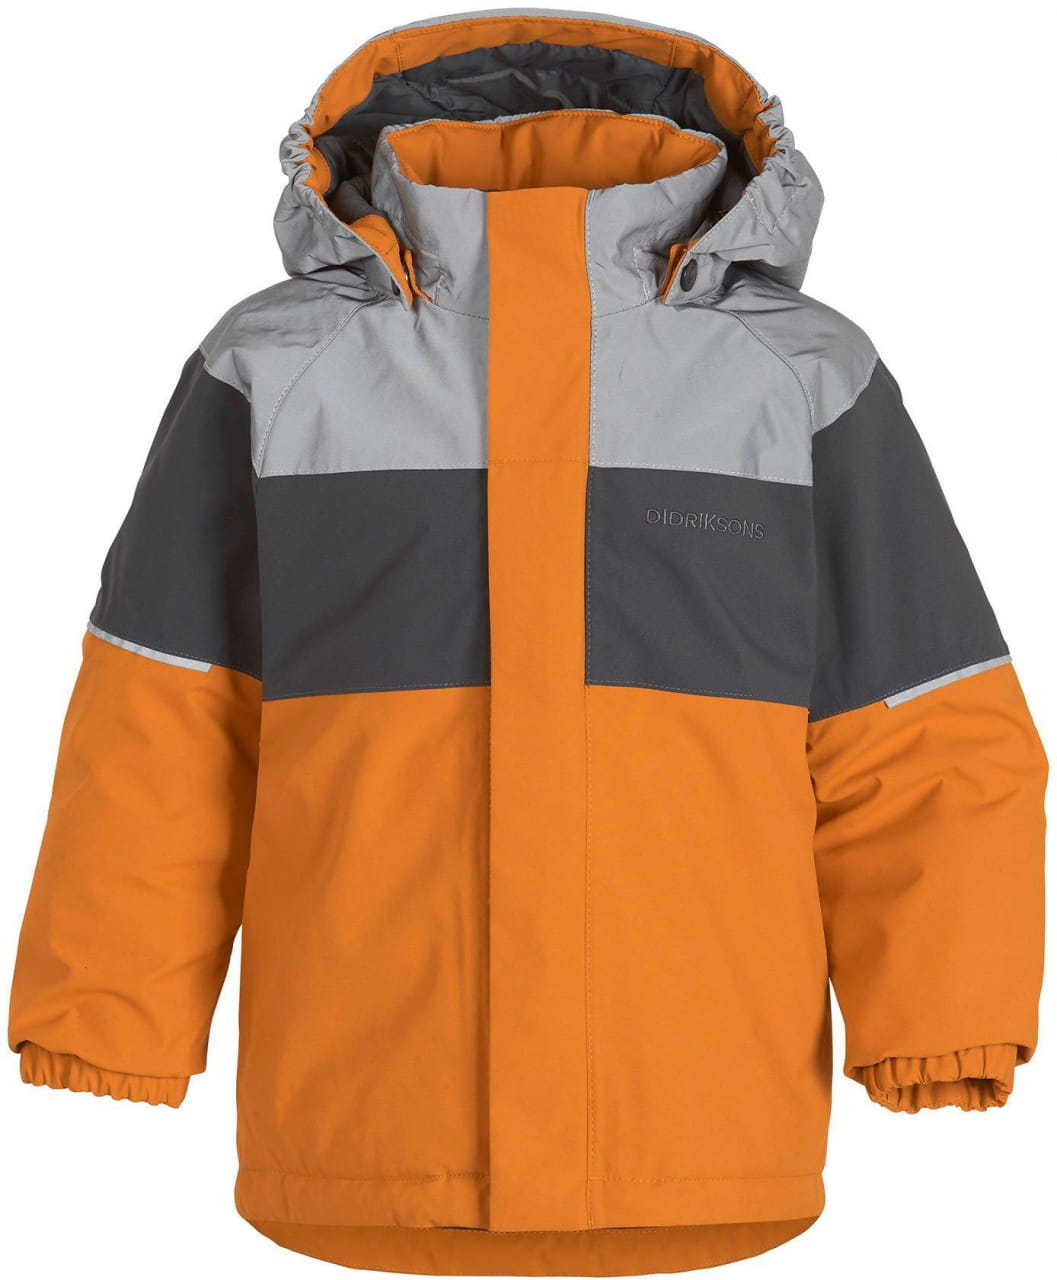 Giacca invernale per bambini Didriksons Lux Kids Jacket